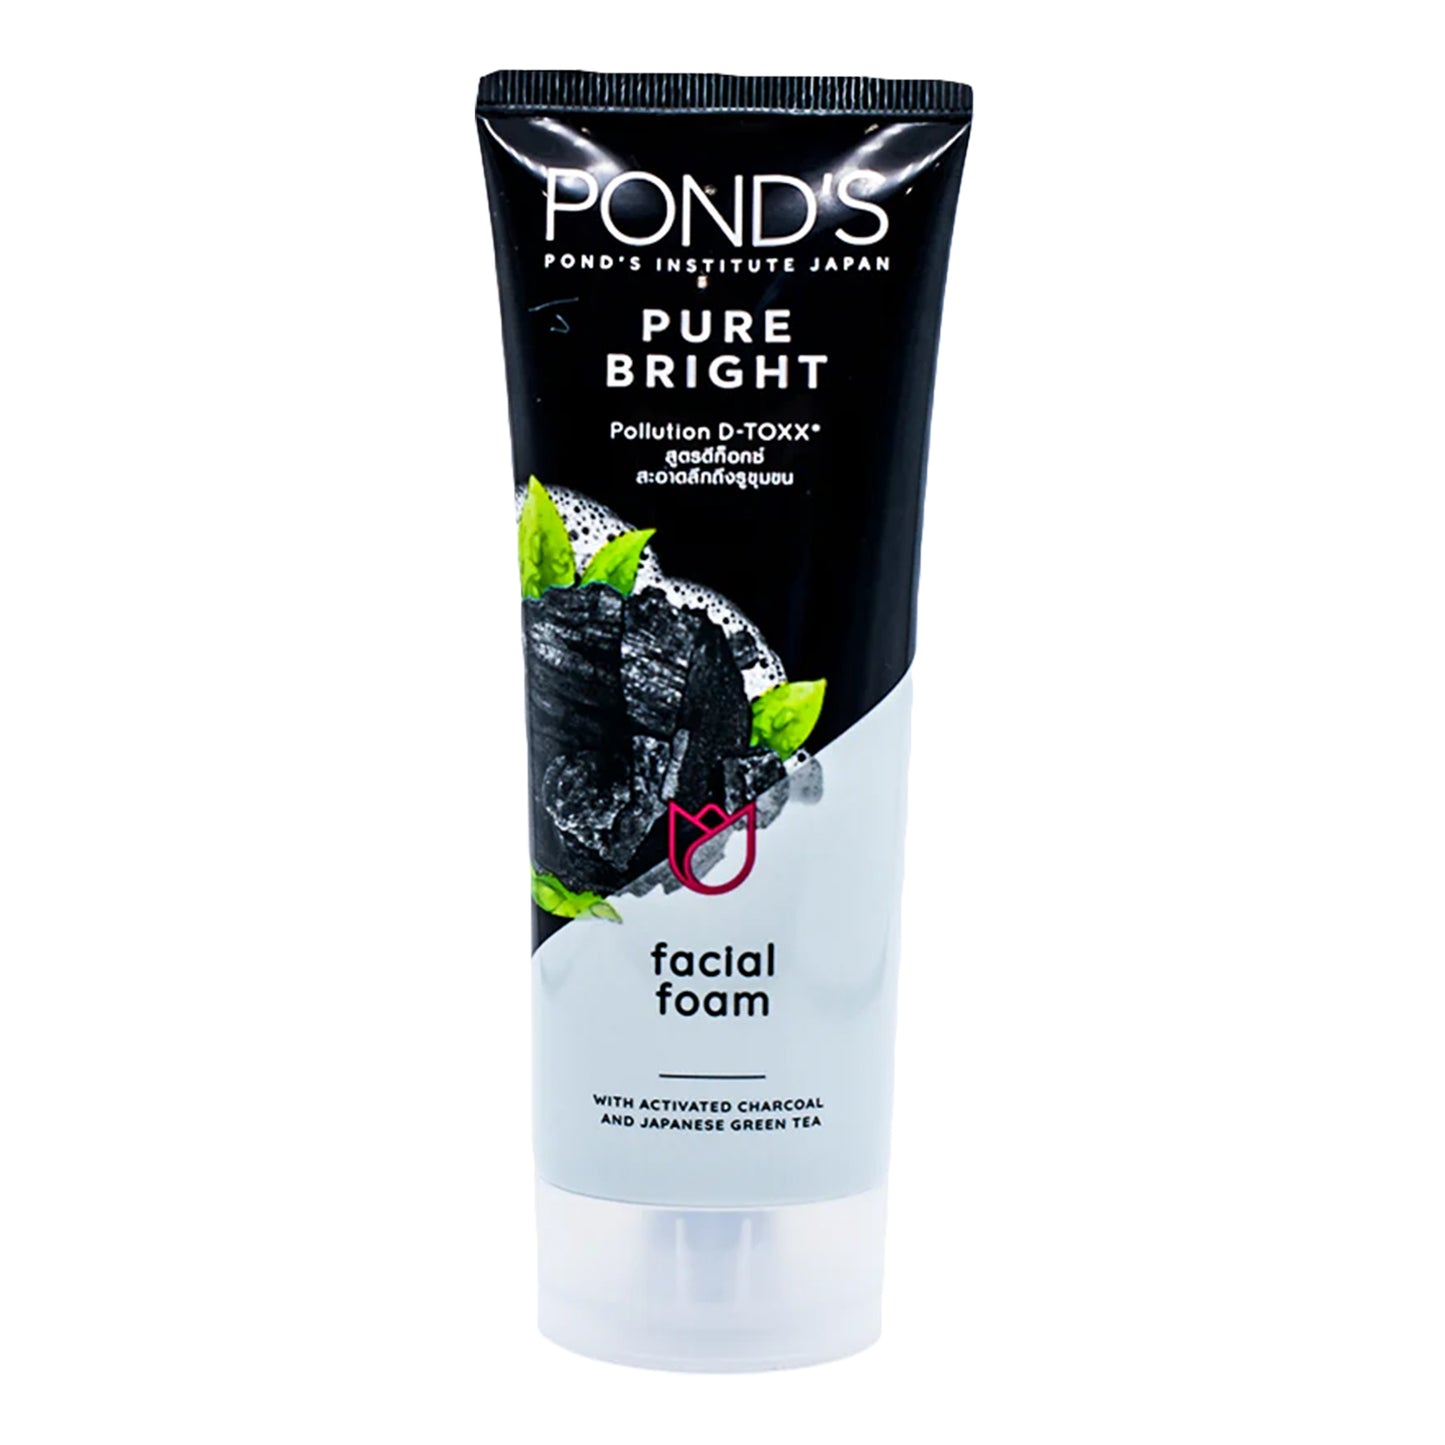 POND'S - PURE BRIGHT POLLUTION D-TOXX FACIAL FOAM WITH ACIVATED CHARCOAL & JAPANESE GREEN TEA - 100G